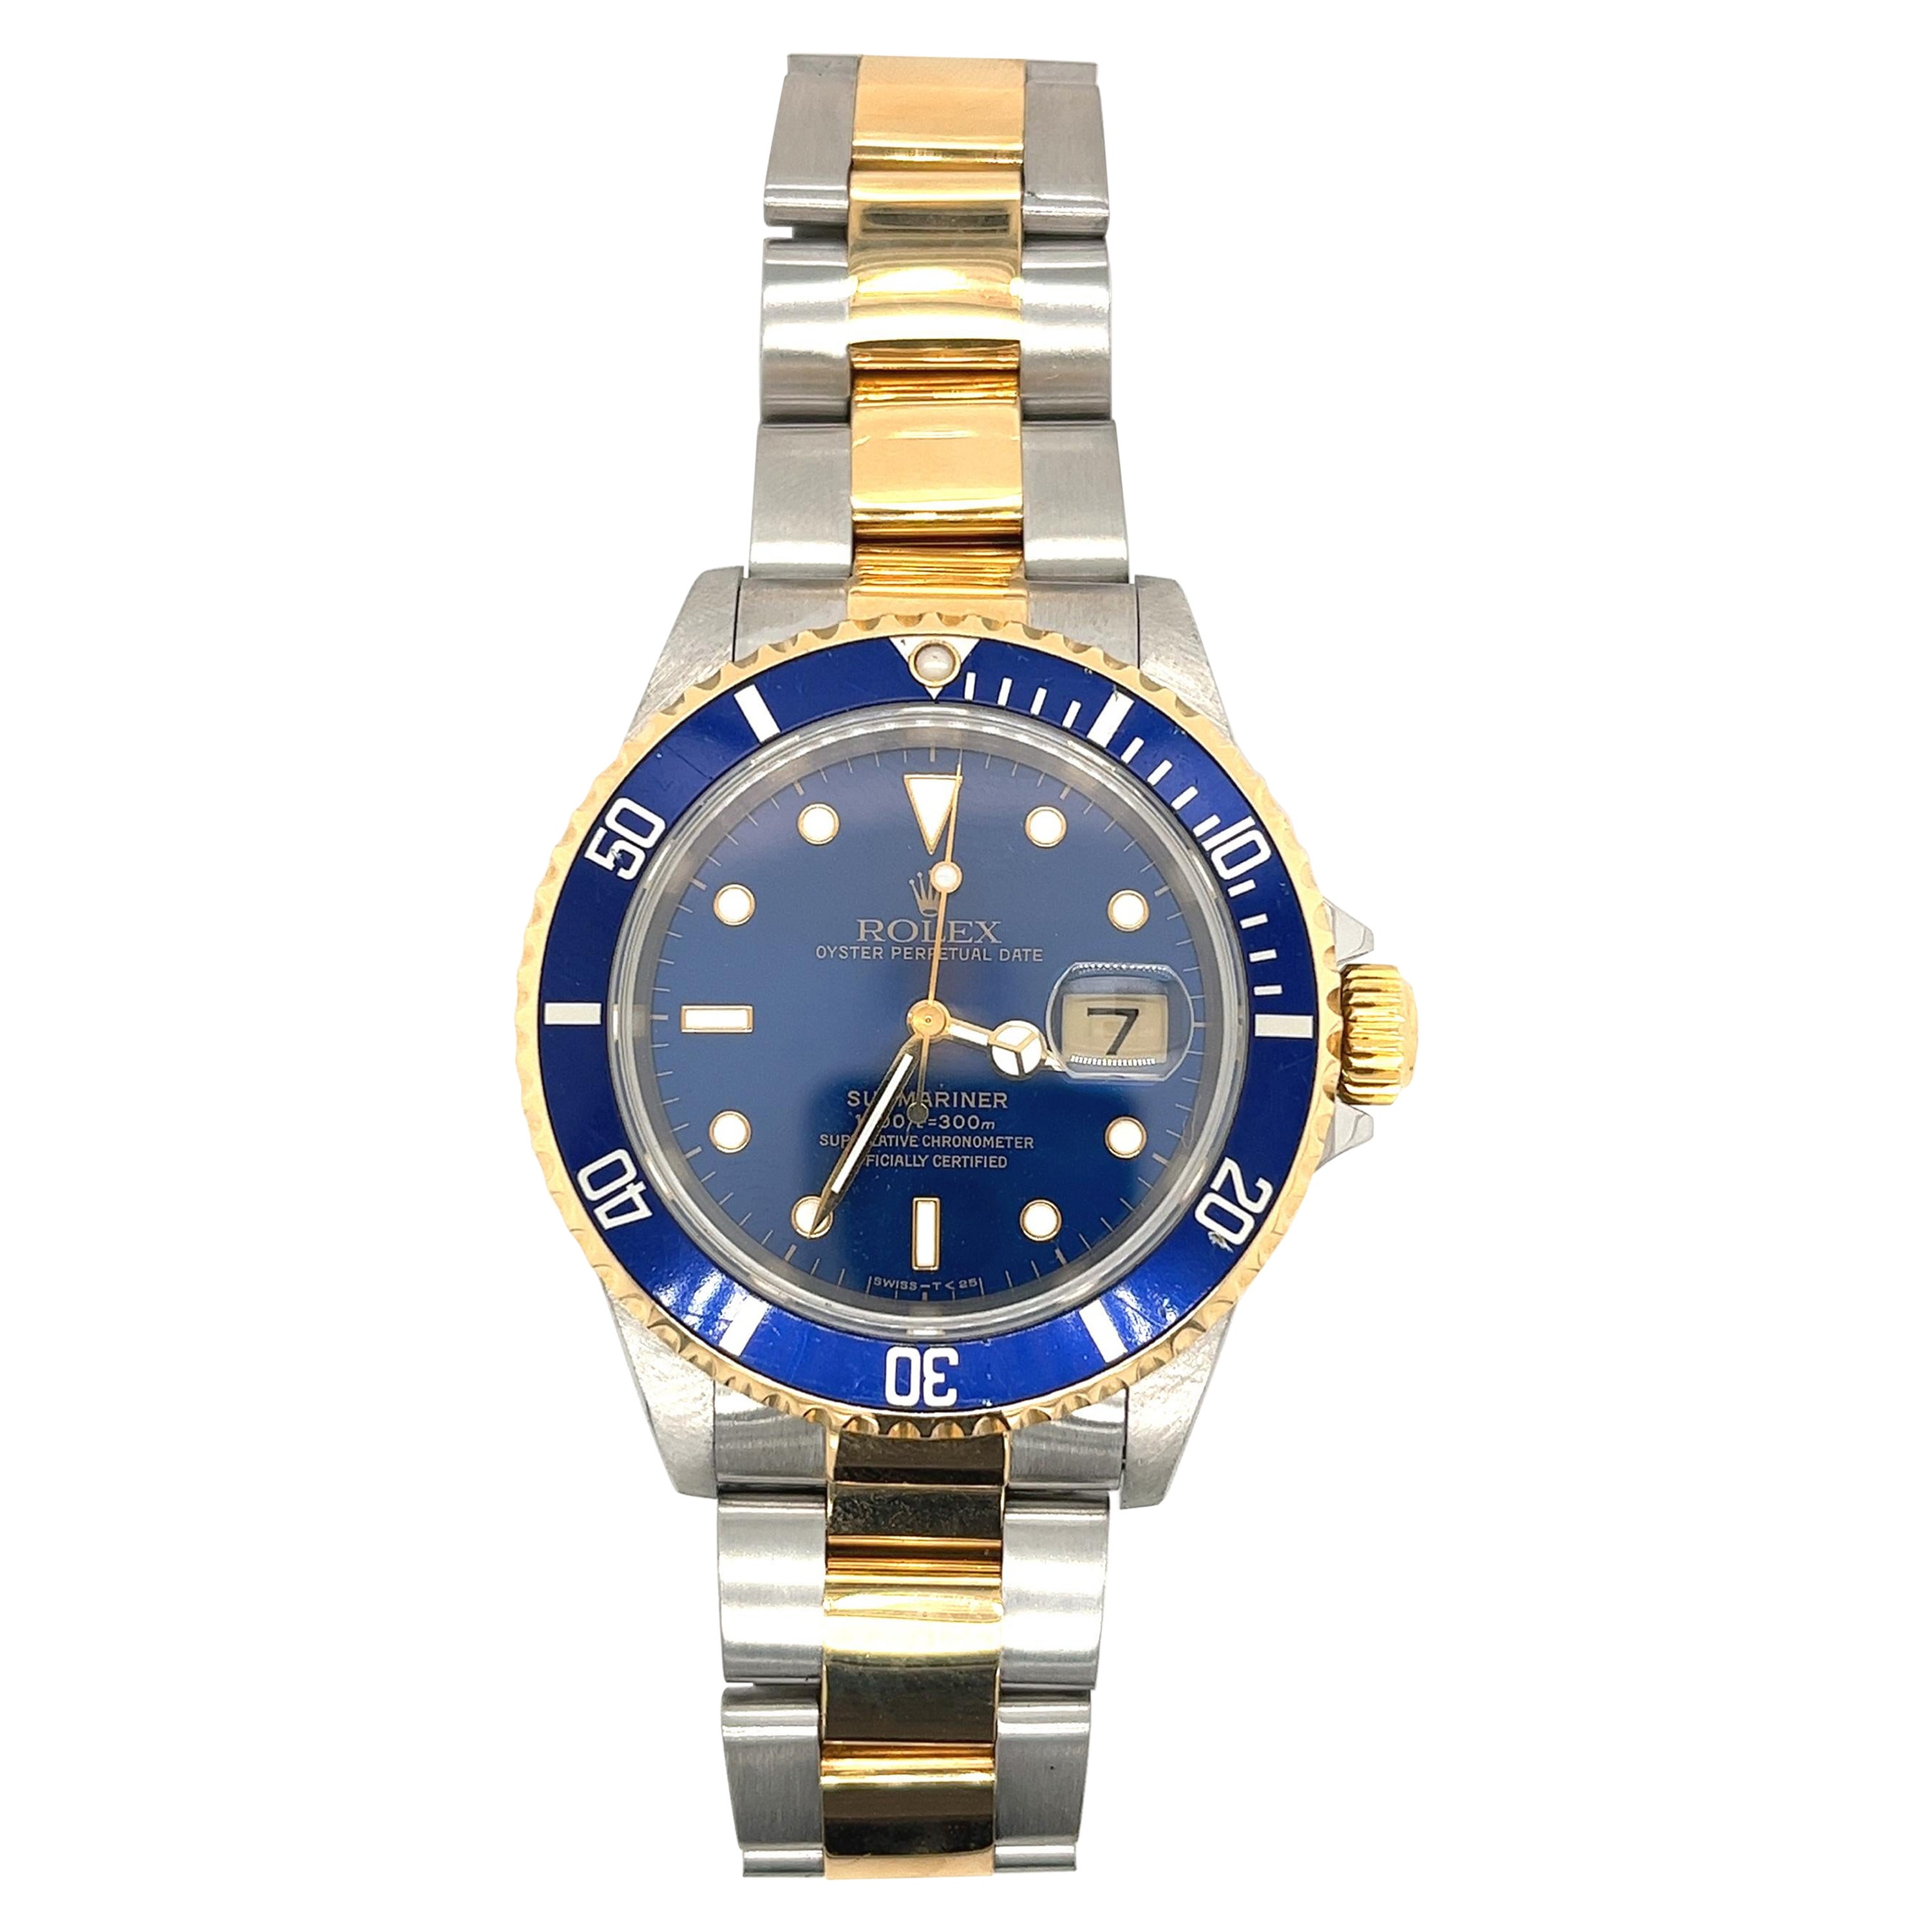 Rolex 16613 Two Tone Submariner Blue Face with Original Box